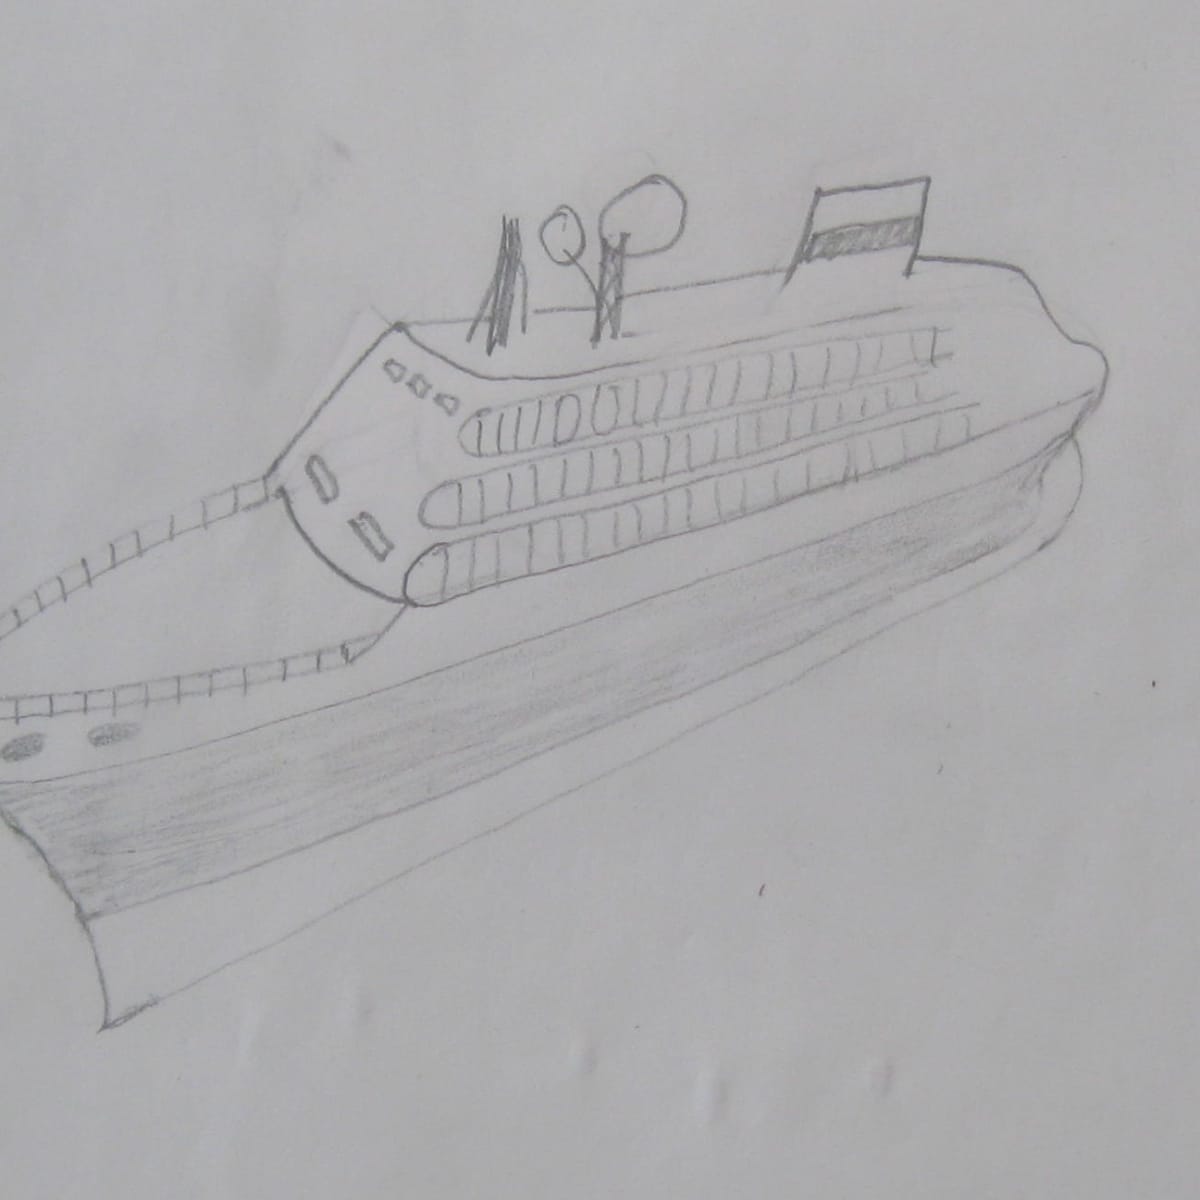 Cruise Ship Drawing Ocean Liner Sketch PNG Clipart Boat Costa Concordia  Cruise Cruise Ship Cruising Free